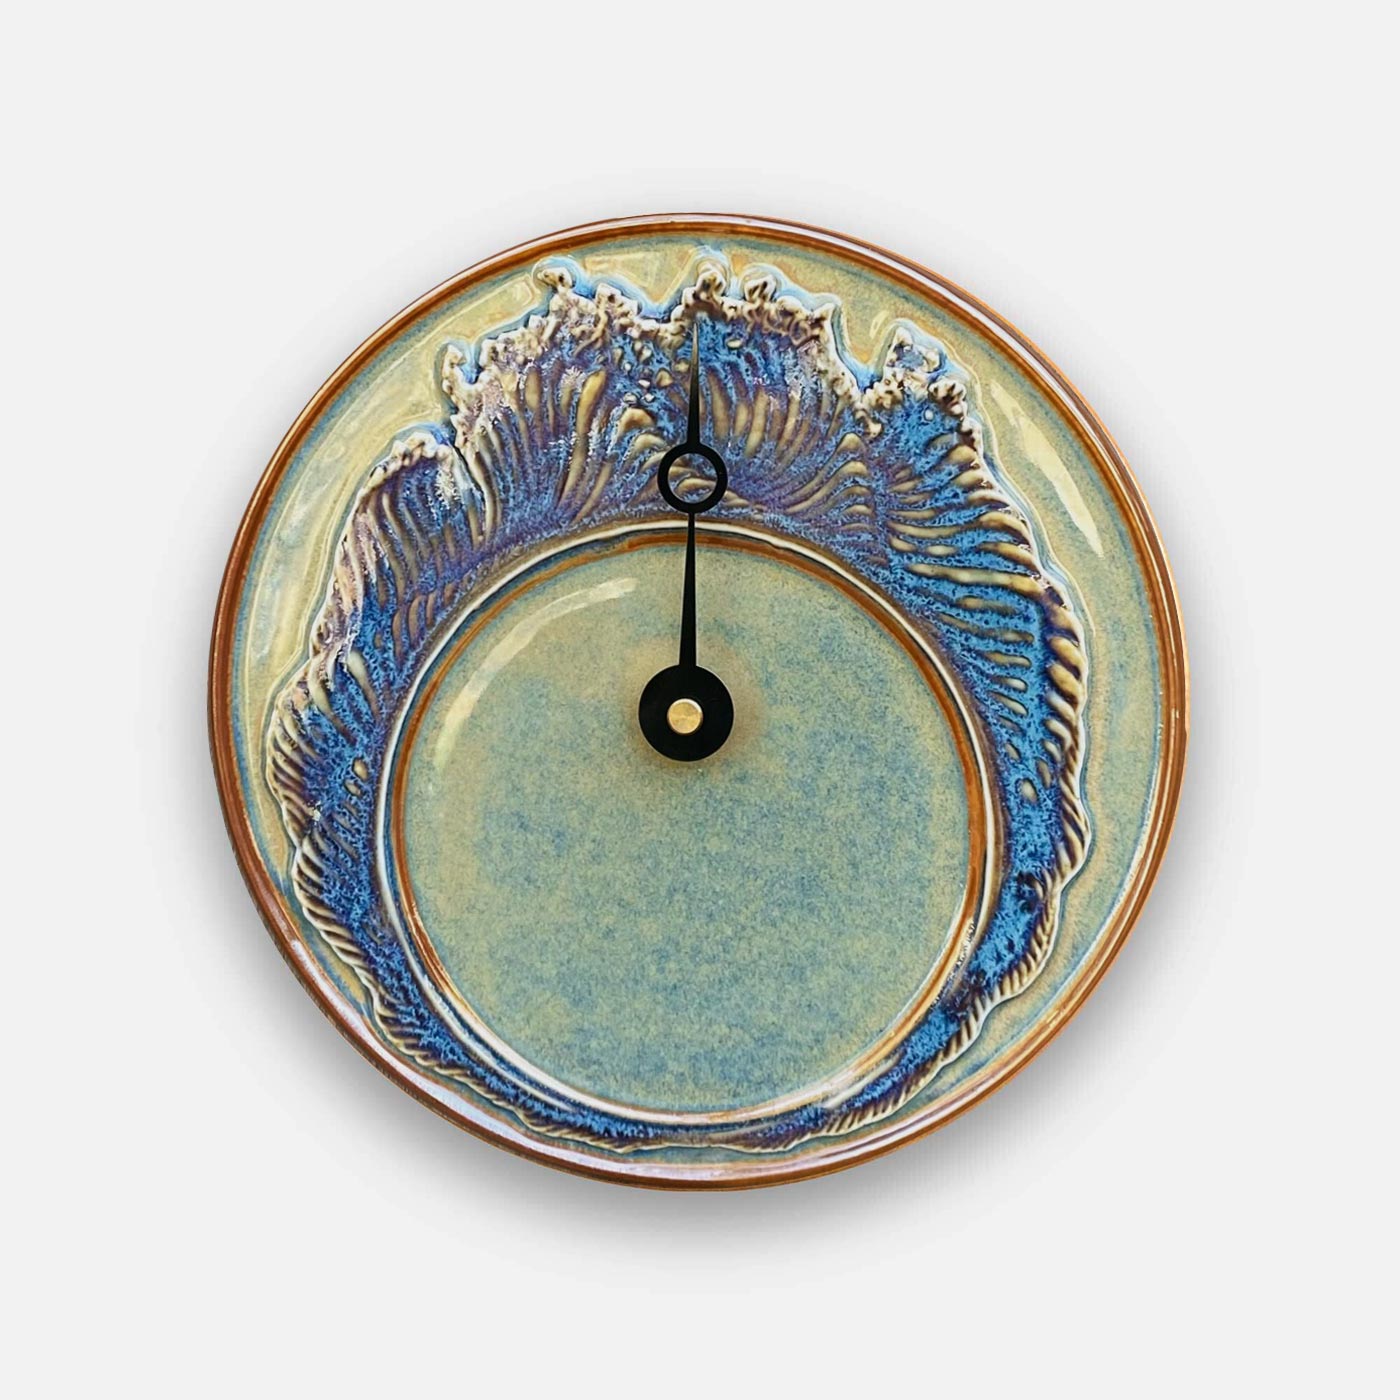 Handmade Pottery Tide Clock in Dune Grass pattern made by Georgetown Pottery in Maine